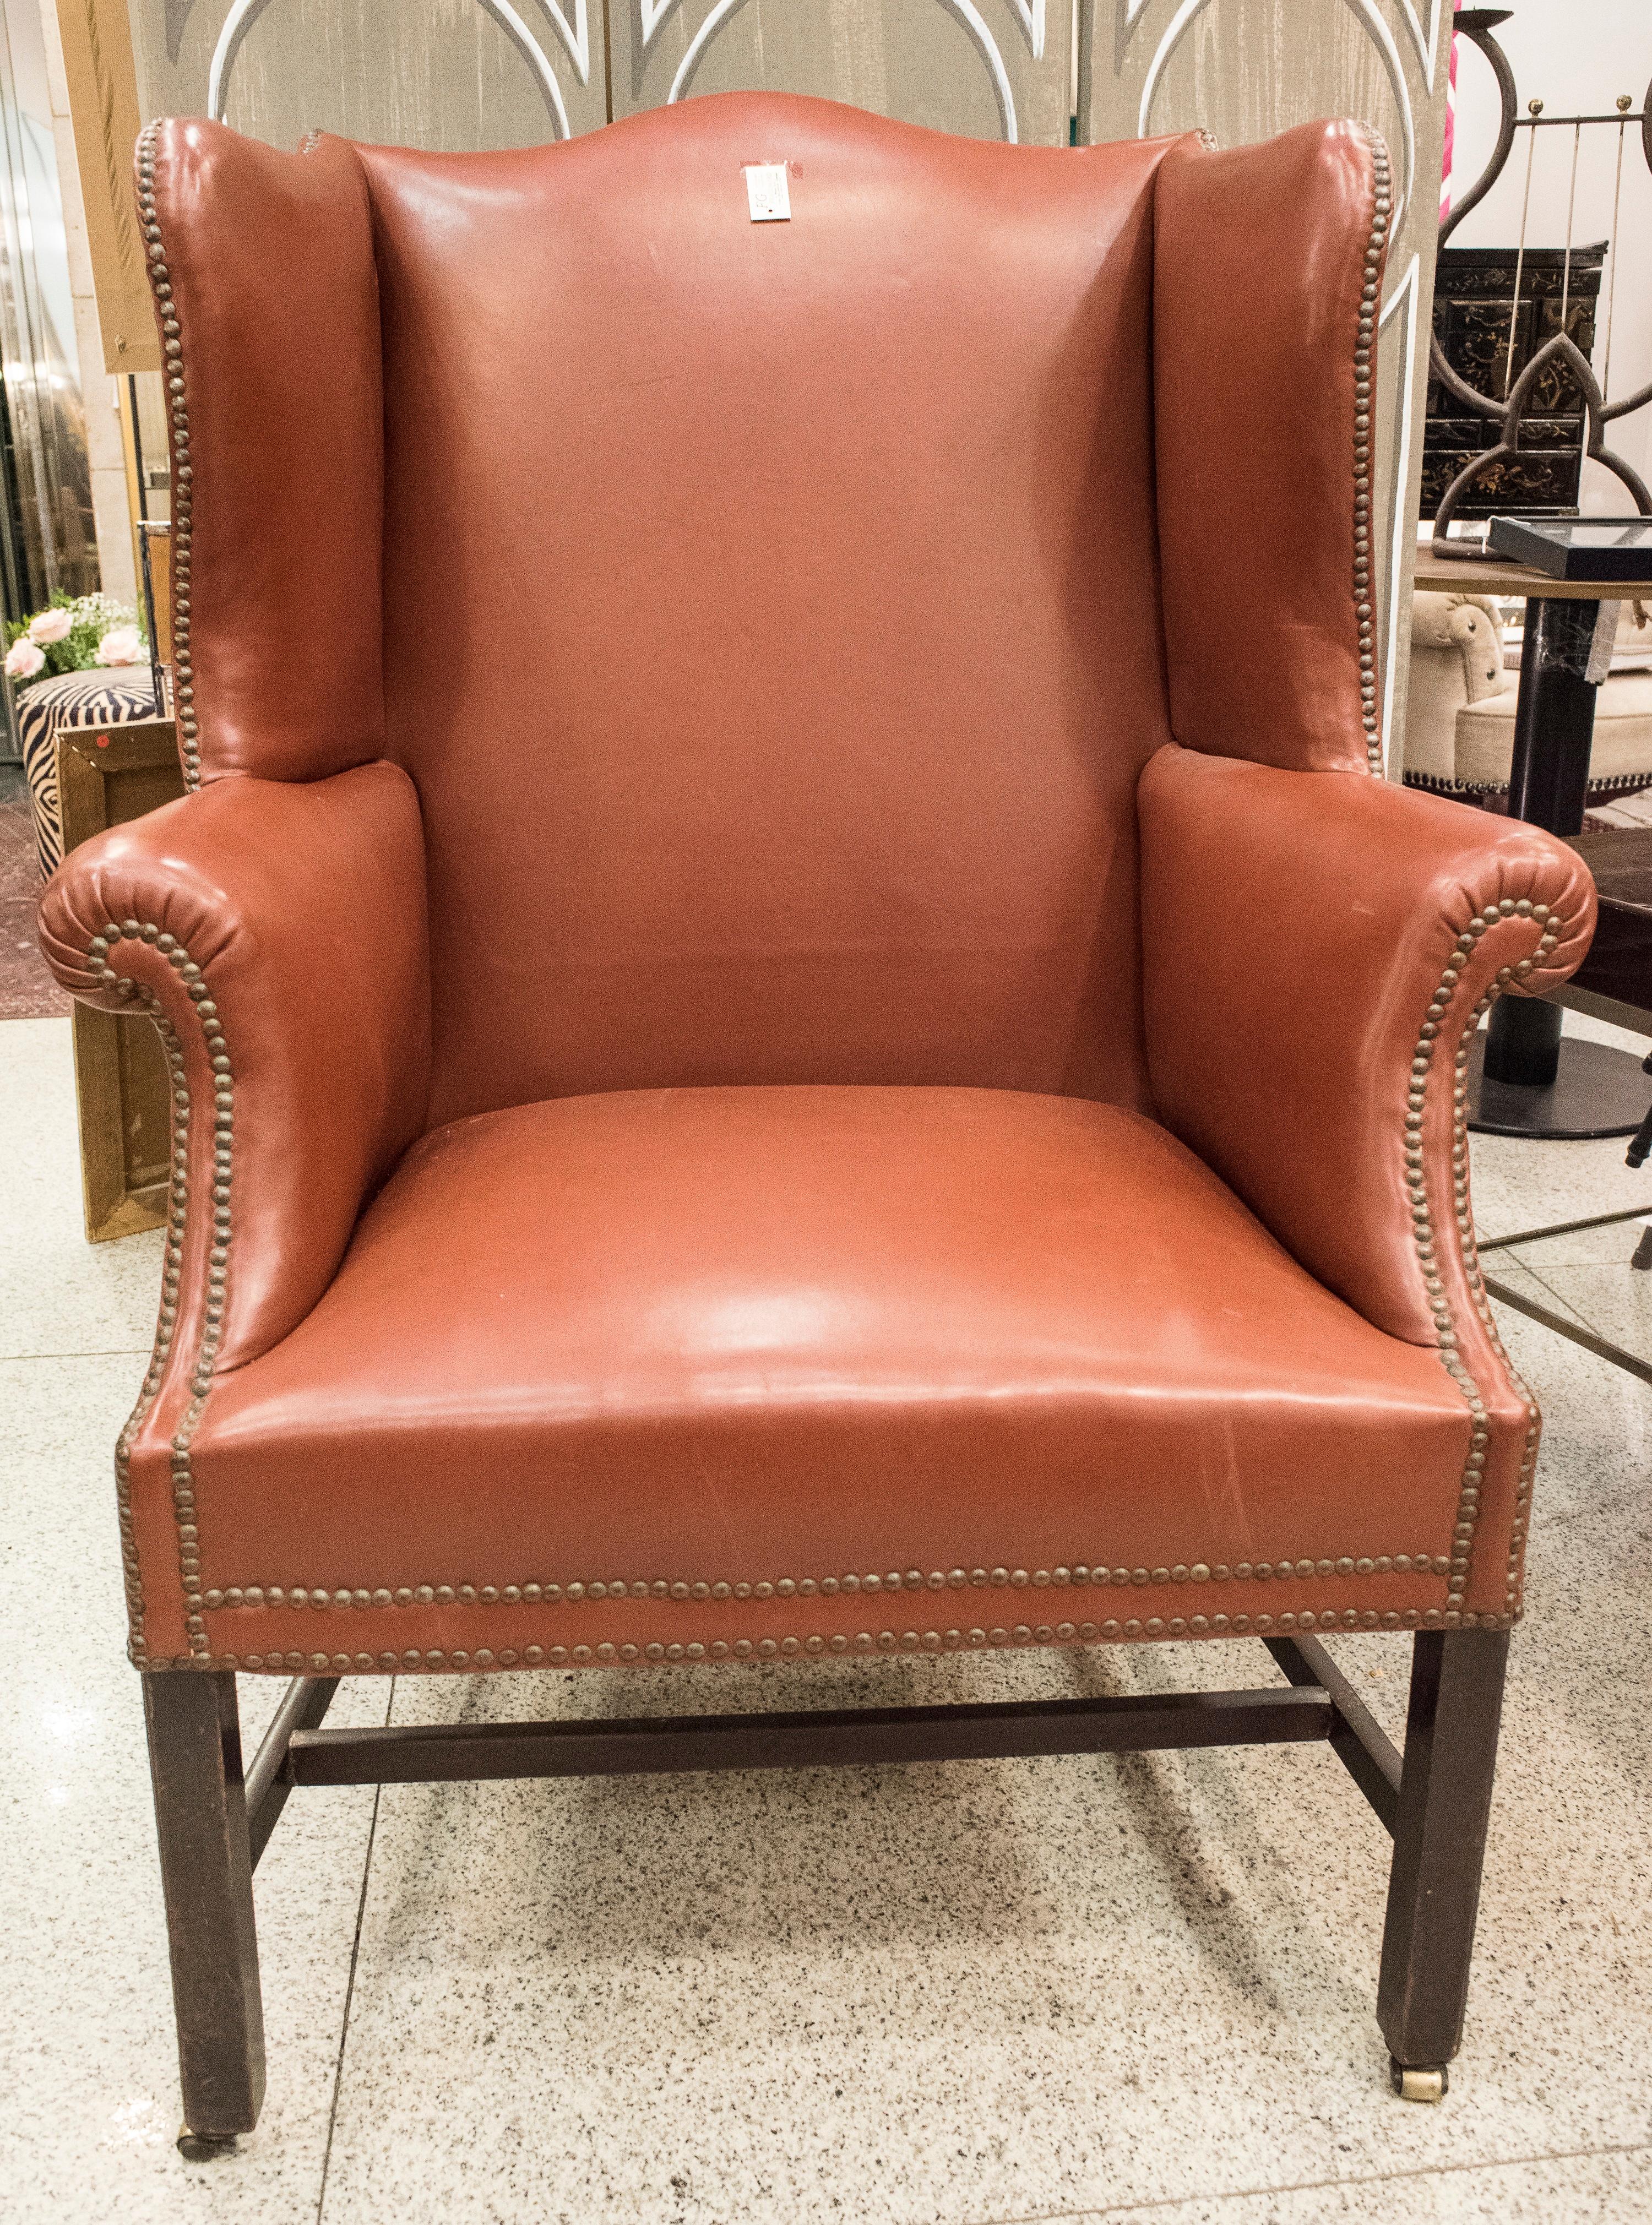 SXVIII George III English Leather and Wood Club Chair O Wingchair

Extraordinary George III English SXVIII leather and oak 4 feet armchair.
With wheels in the feet , the leather has been changed long time ago , maybe 50 years ago, but it has wear